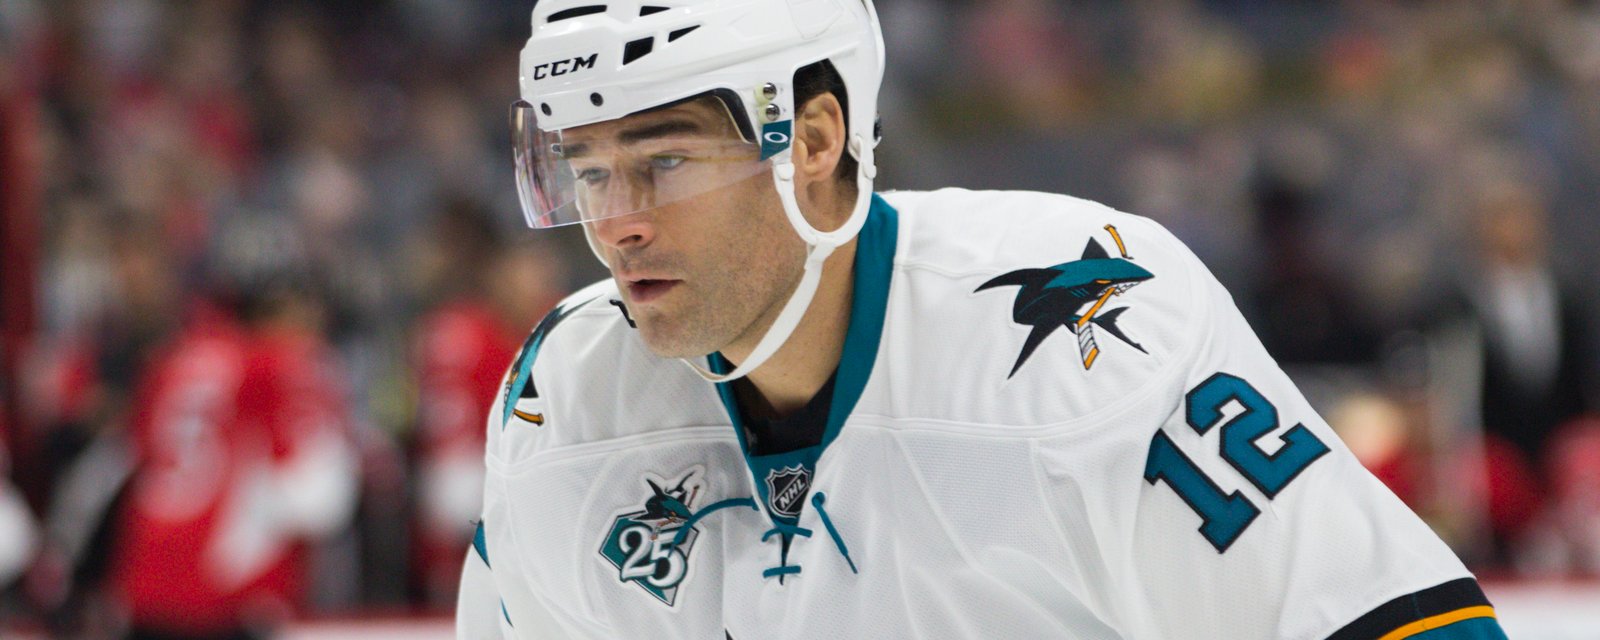 Patrick Marleau is ecstatic to play his first game with the Leafs